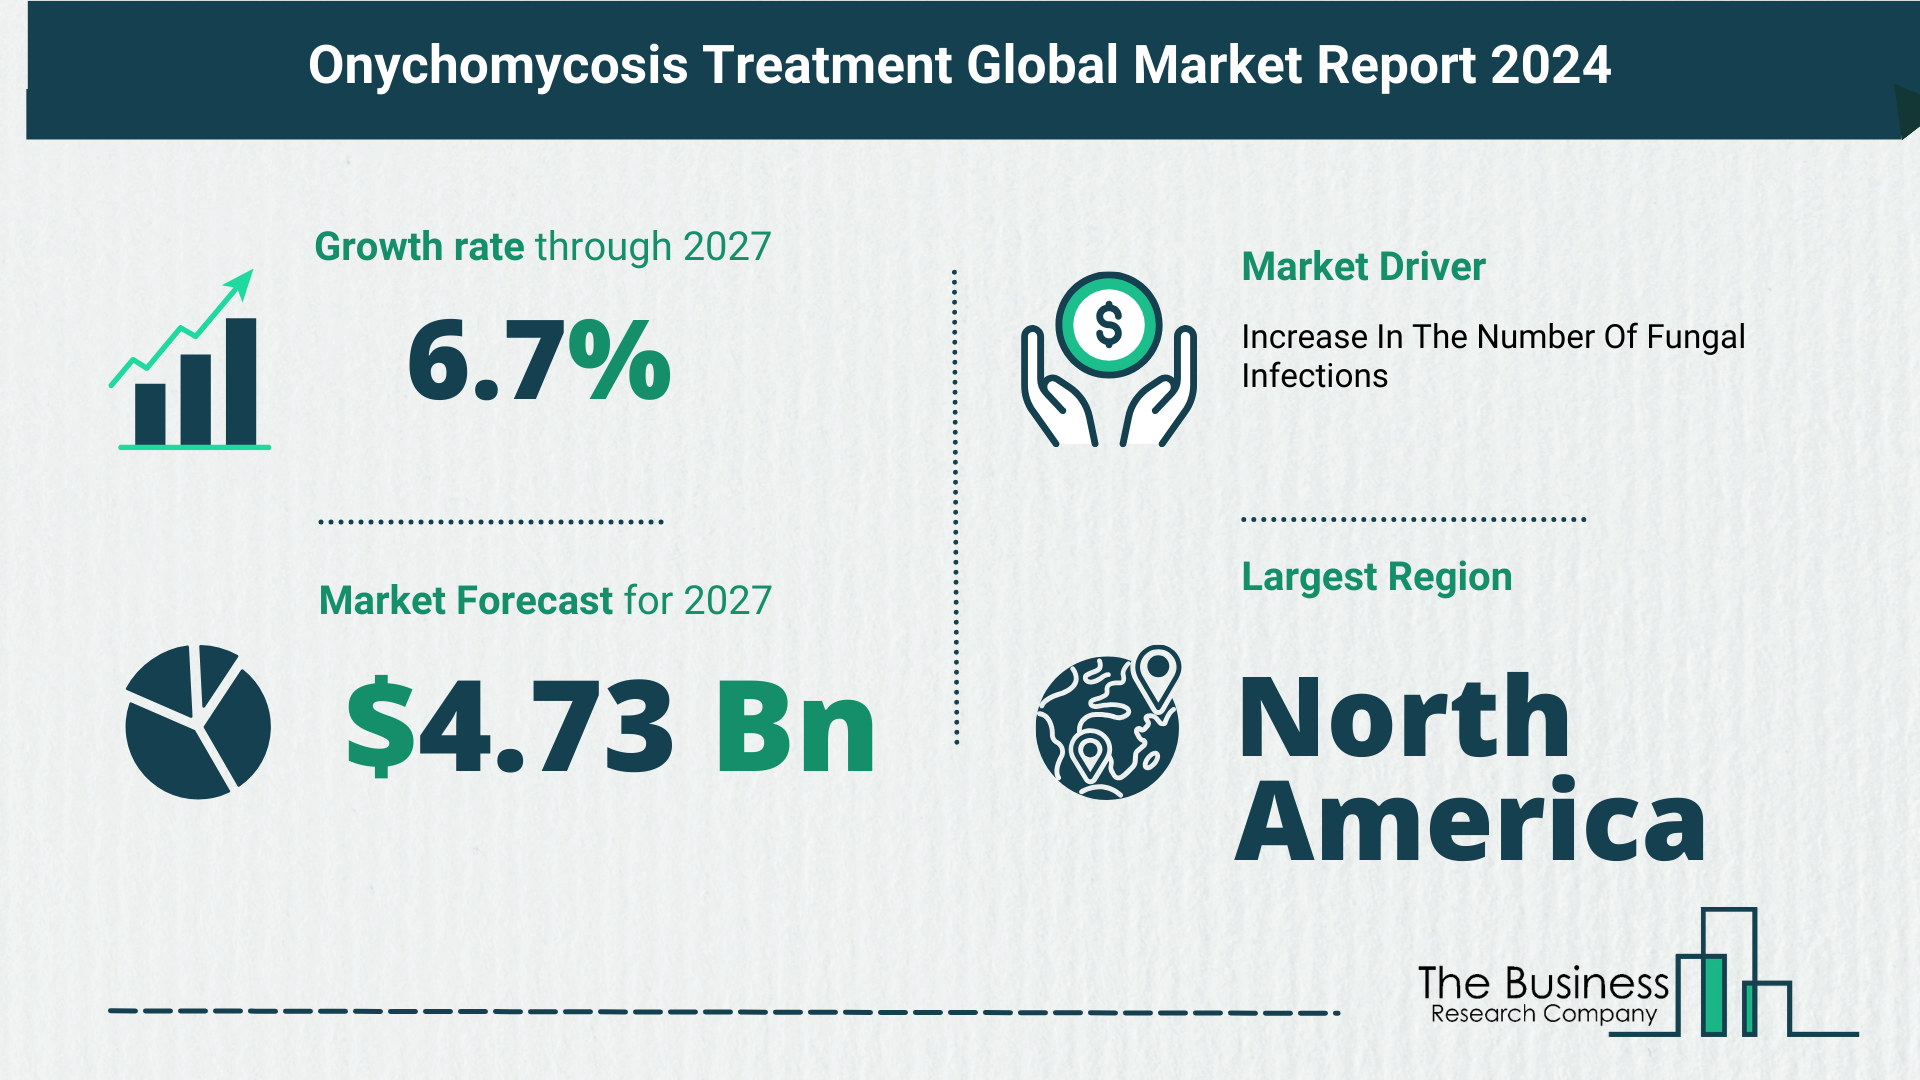 Global Onychomycosis Treatment Market Analysis 2024: Size, Share, And Key Trends